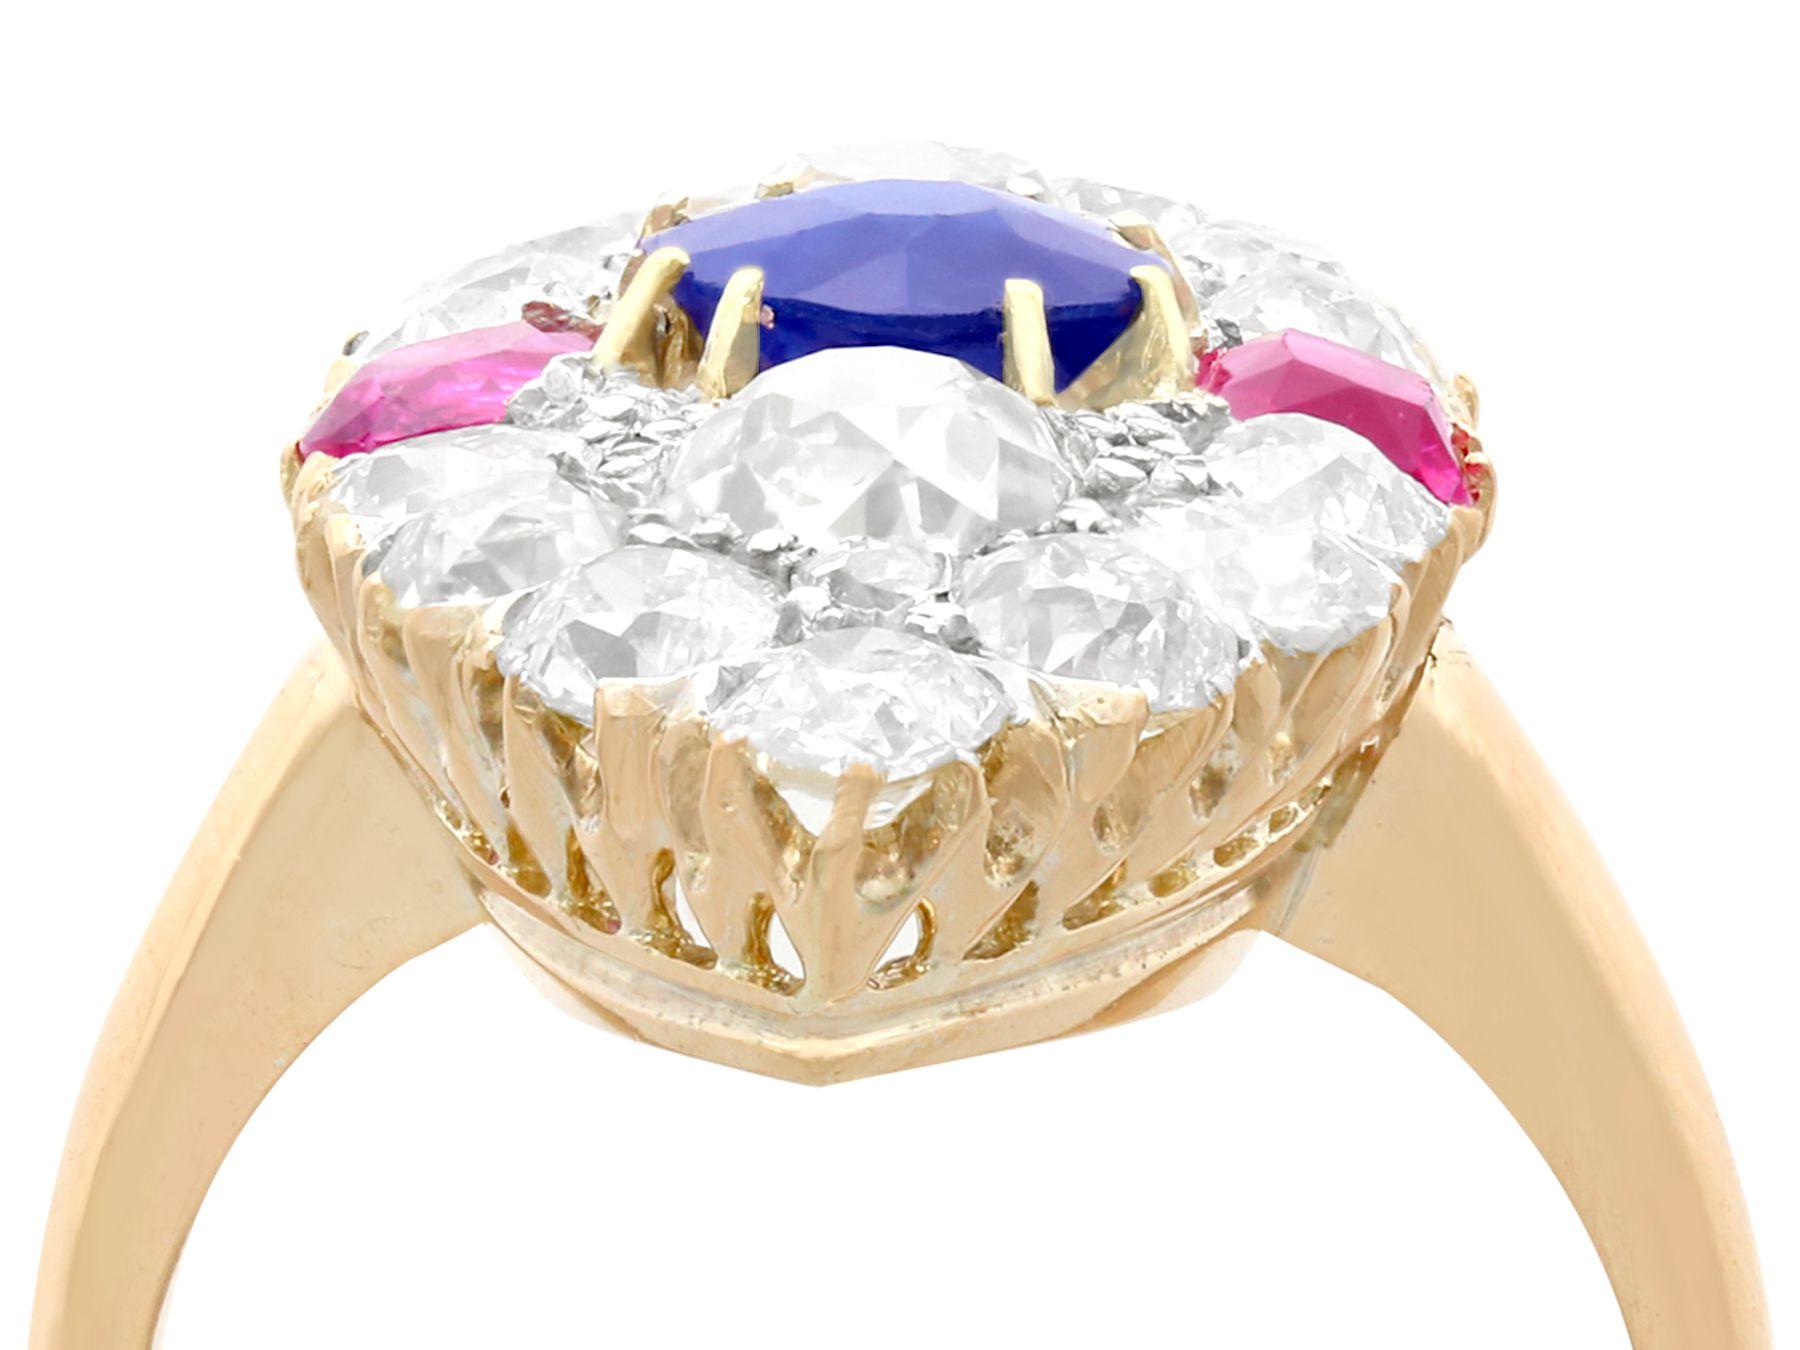 An impressive antique Victorian 4.34 carat diamond and 1.26 carat sapphire, 0.85 carat ruby and 17 karat yellow gold, silver set navette shaped ring; part of our diverse antique estate jewelry collections.

This stunning, fine and impressive